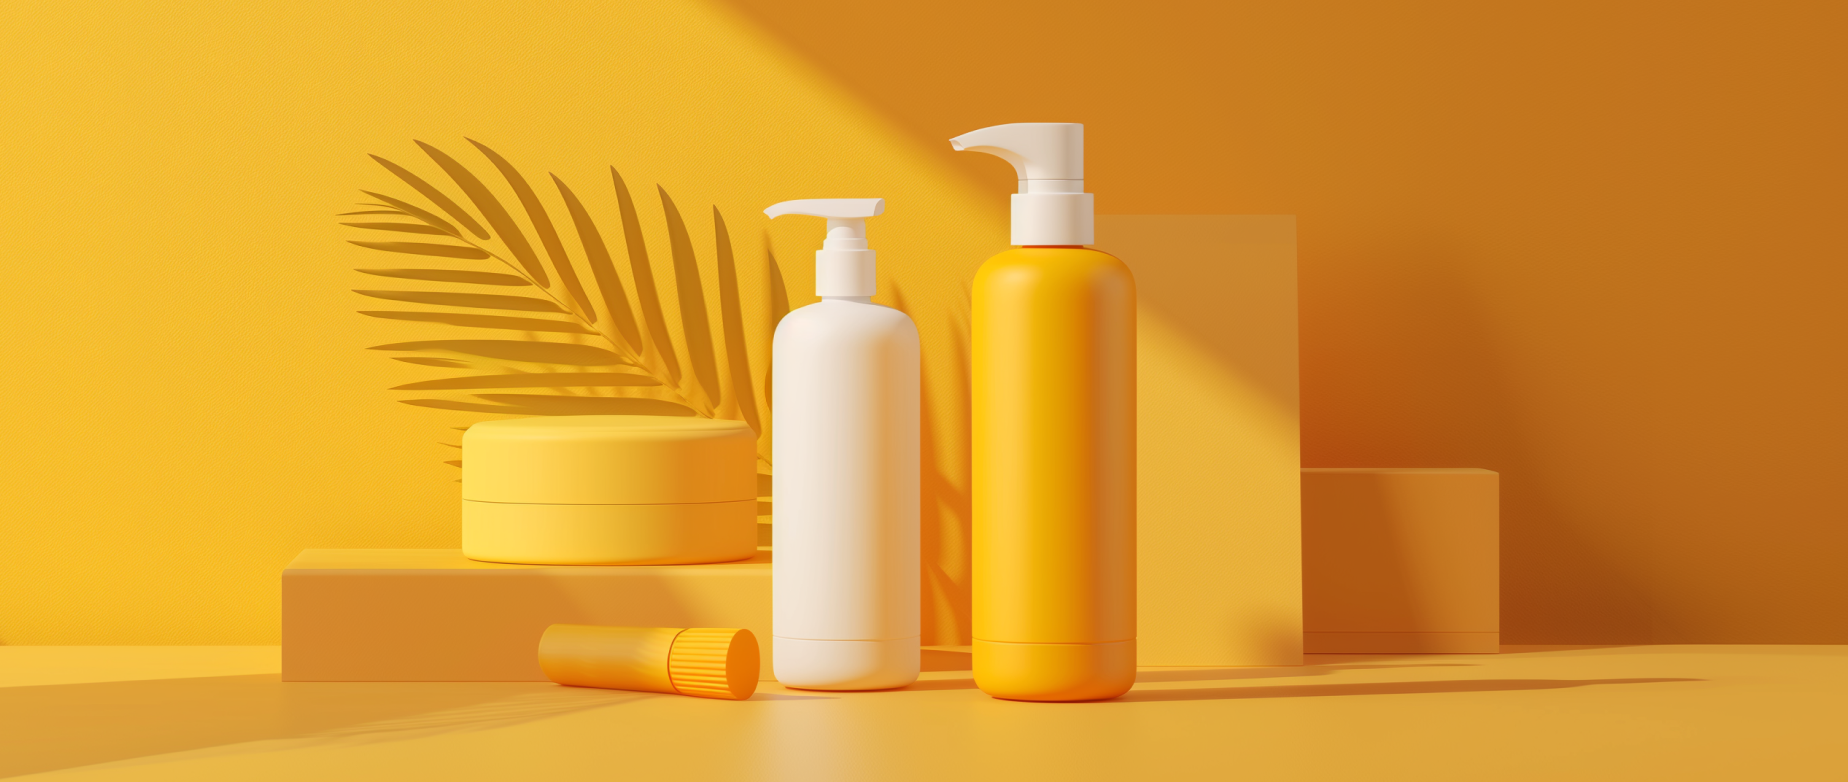 A display of cosmetics containers on an orange background with a decorative plant.